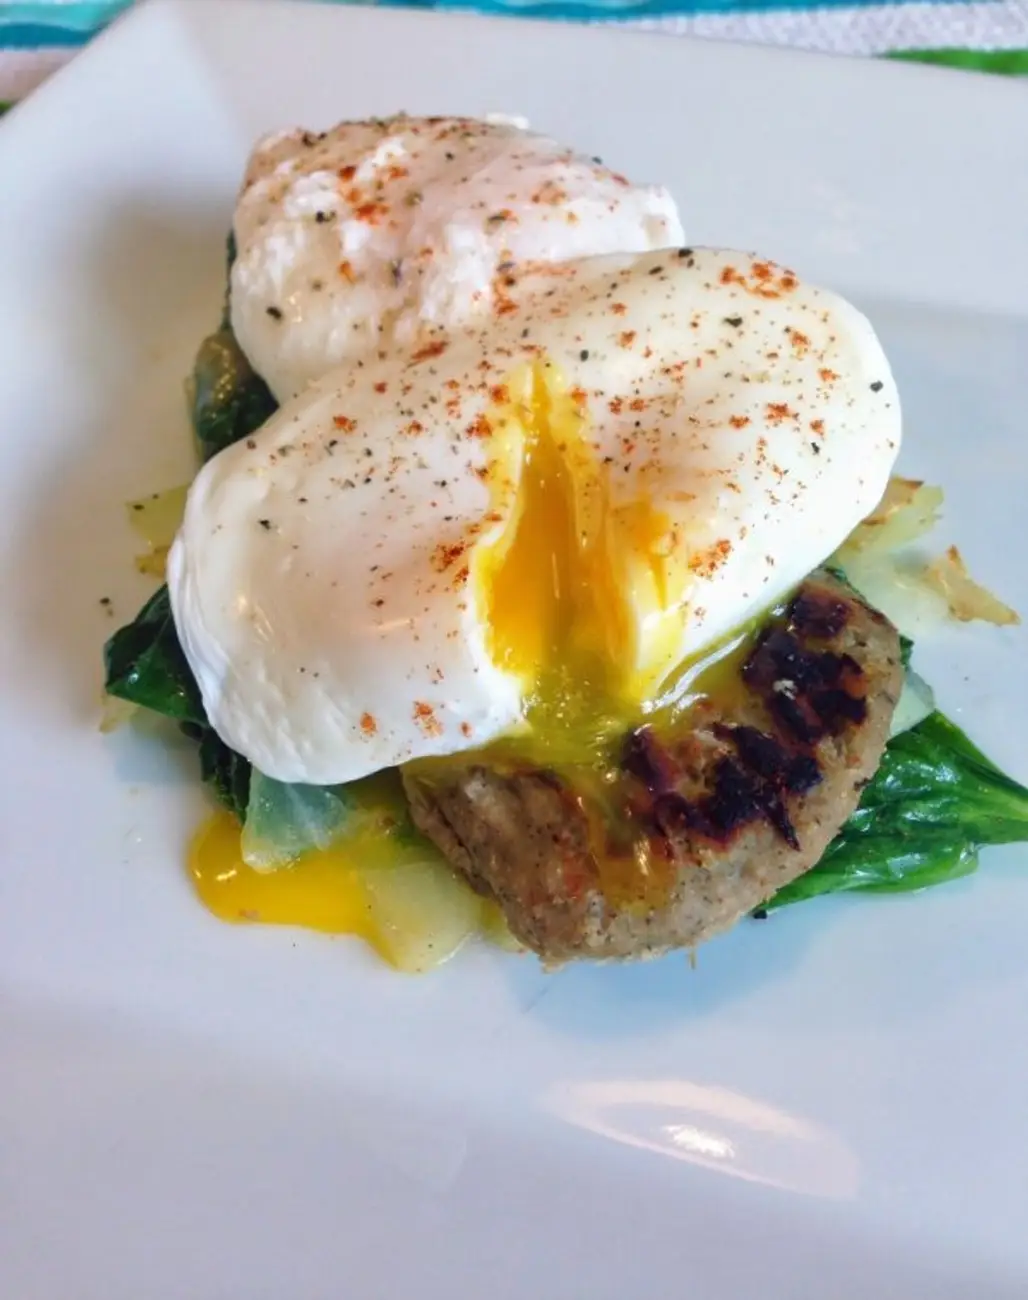 Poached Eggs over Turkey Sausage and Wilted Spinach